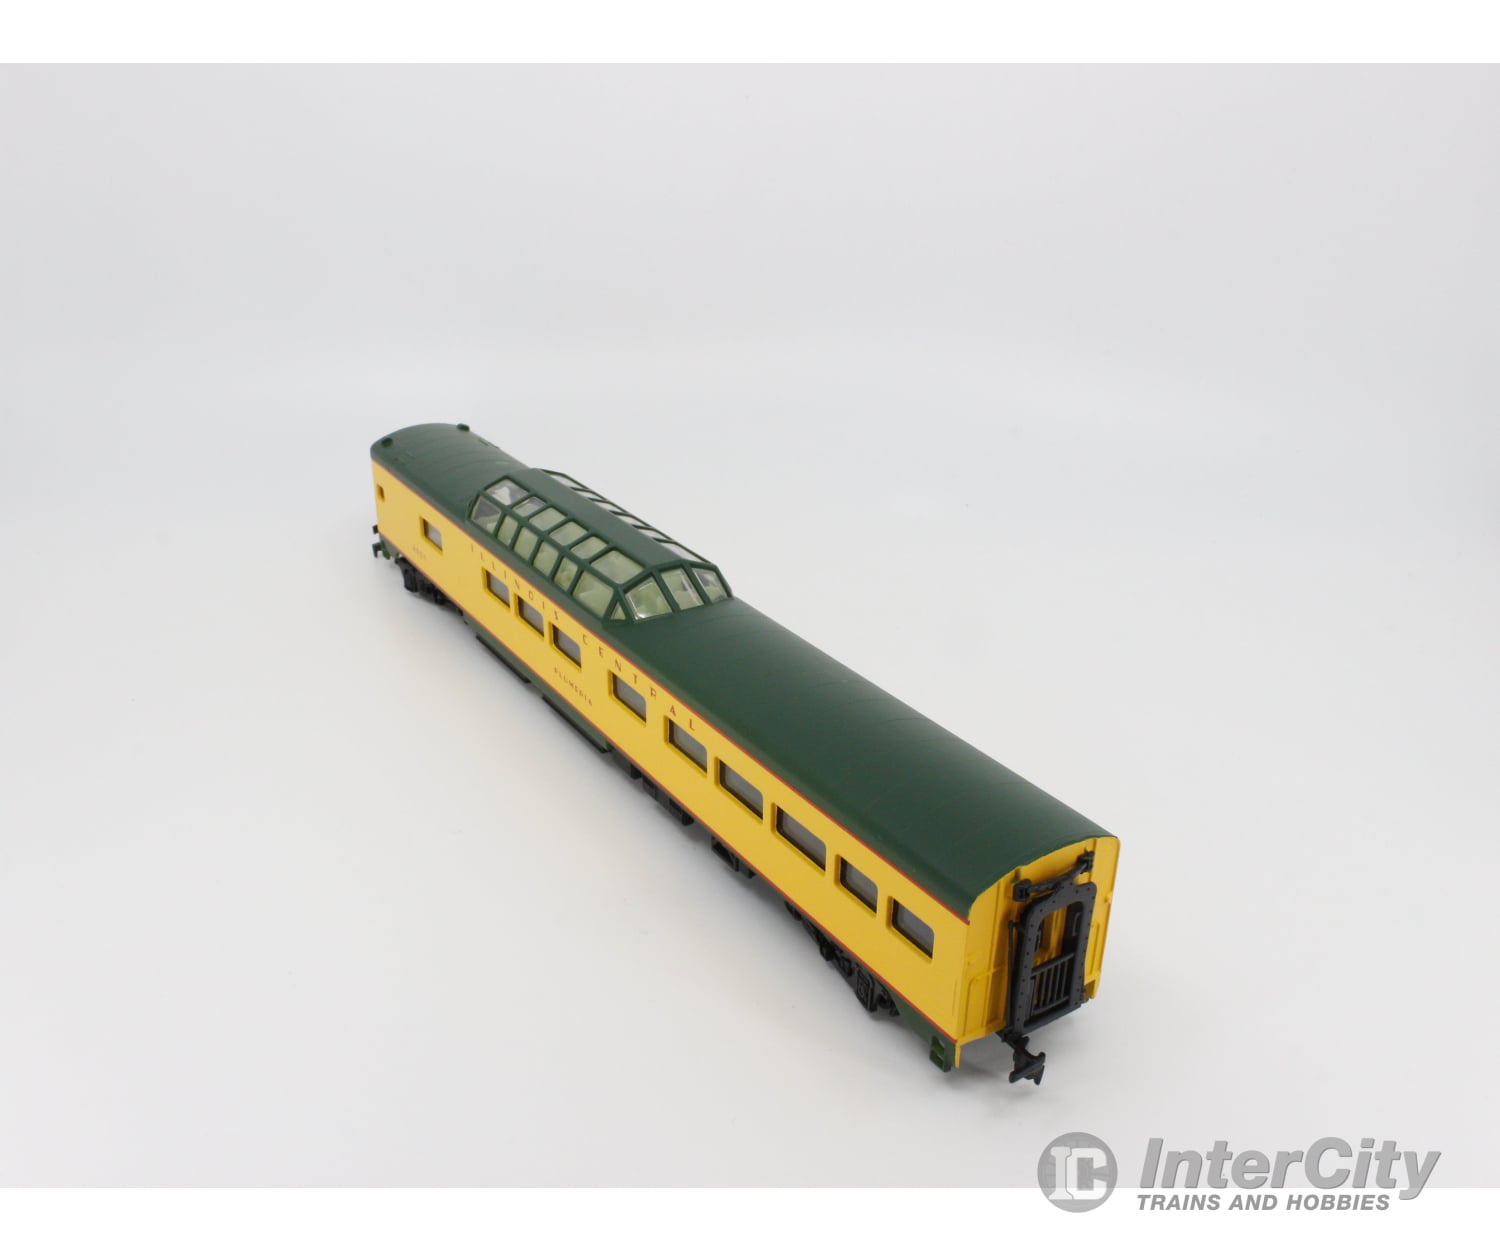 International Hobby Corp. 48337 Ho Vista Dome Passenger Car Smooth Side P.s. Illinois Central (Ic)